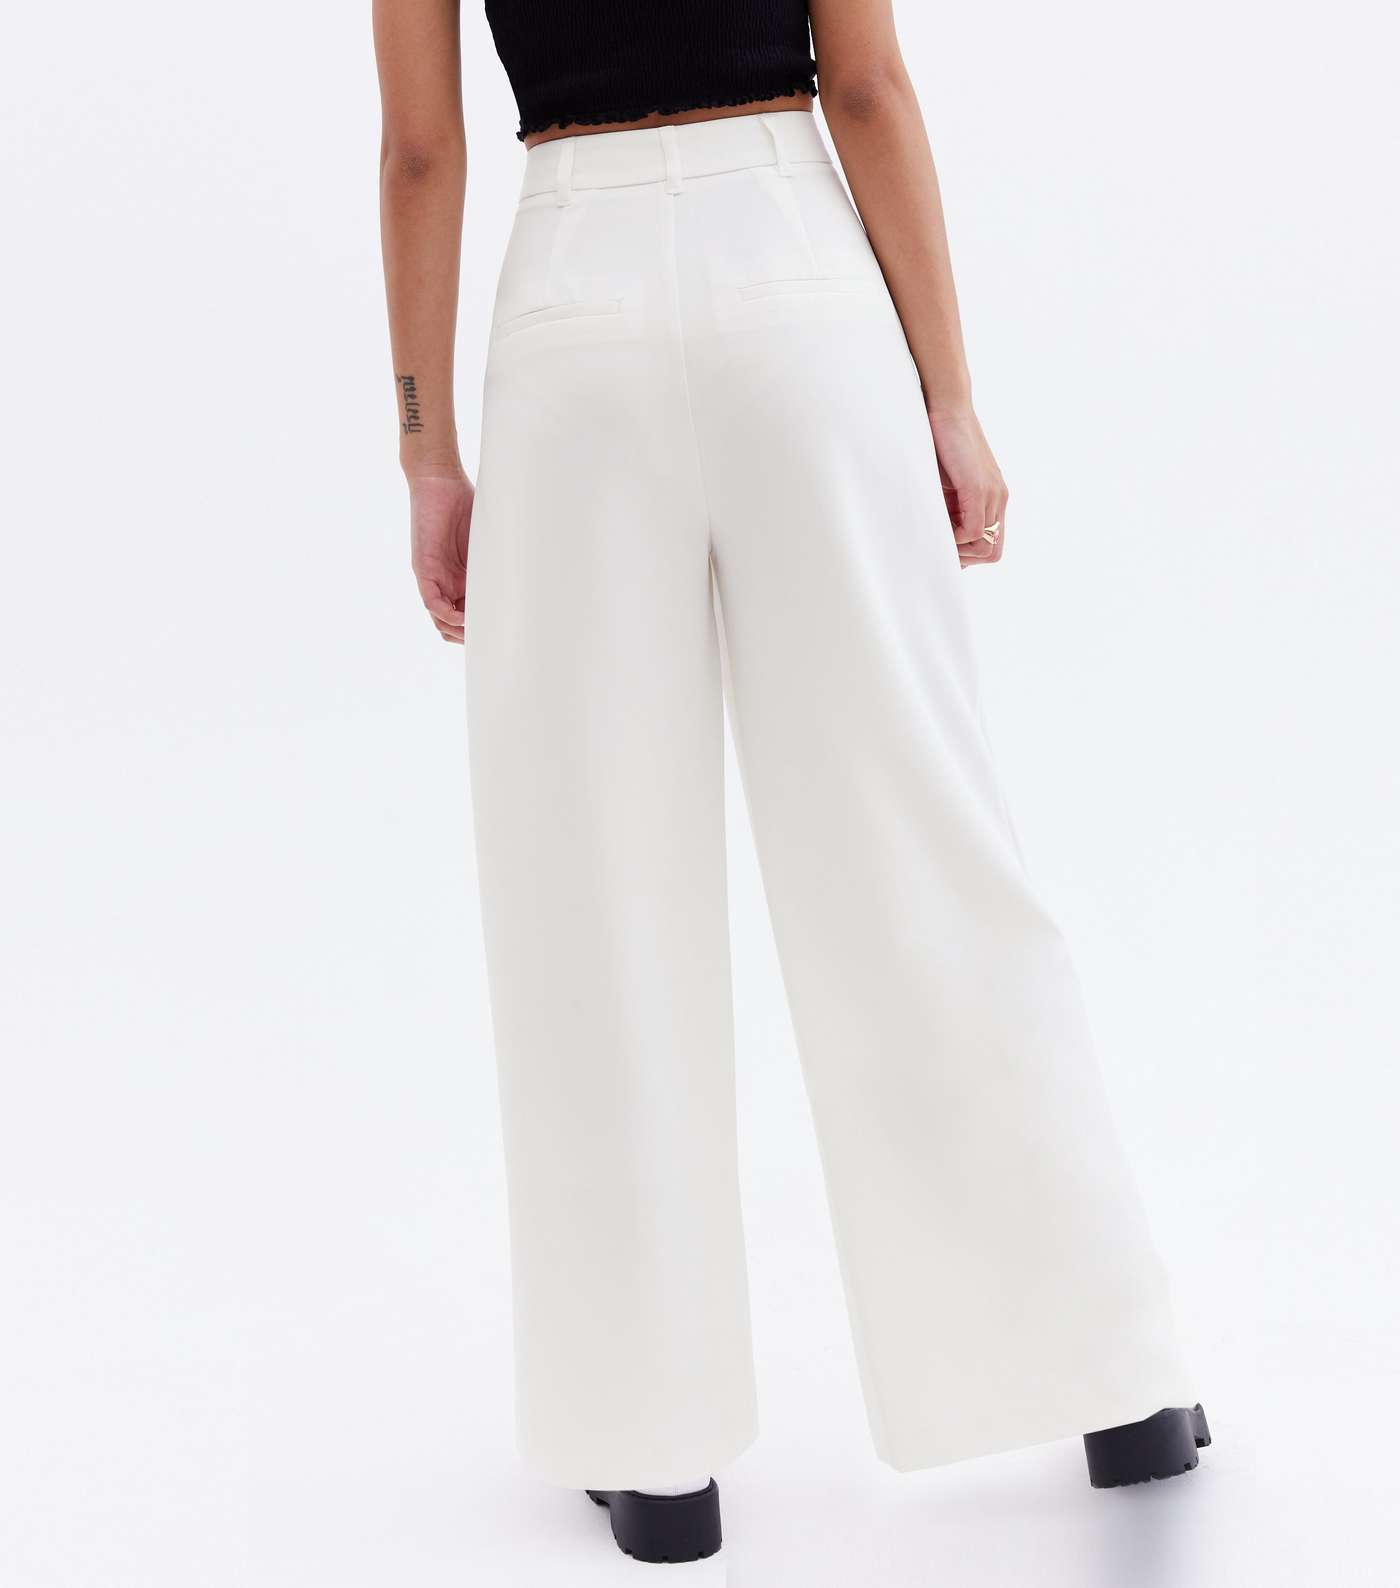 Suits You Petite White Wide Leg Trousers Image 4